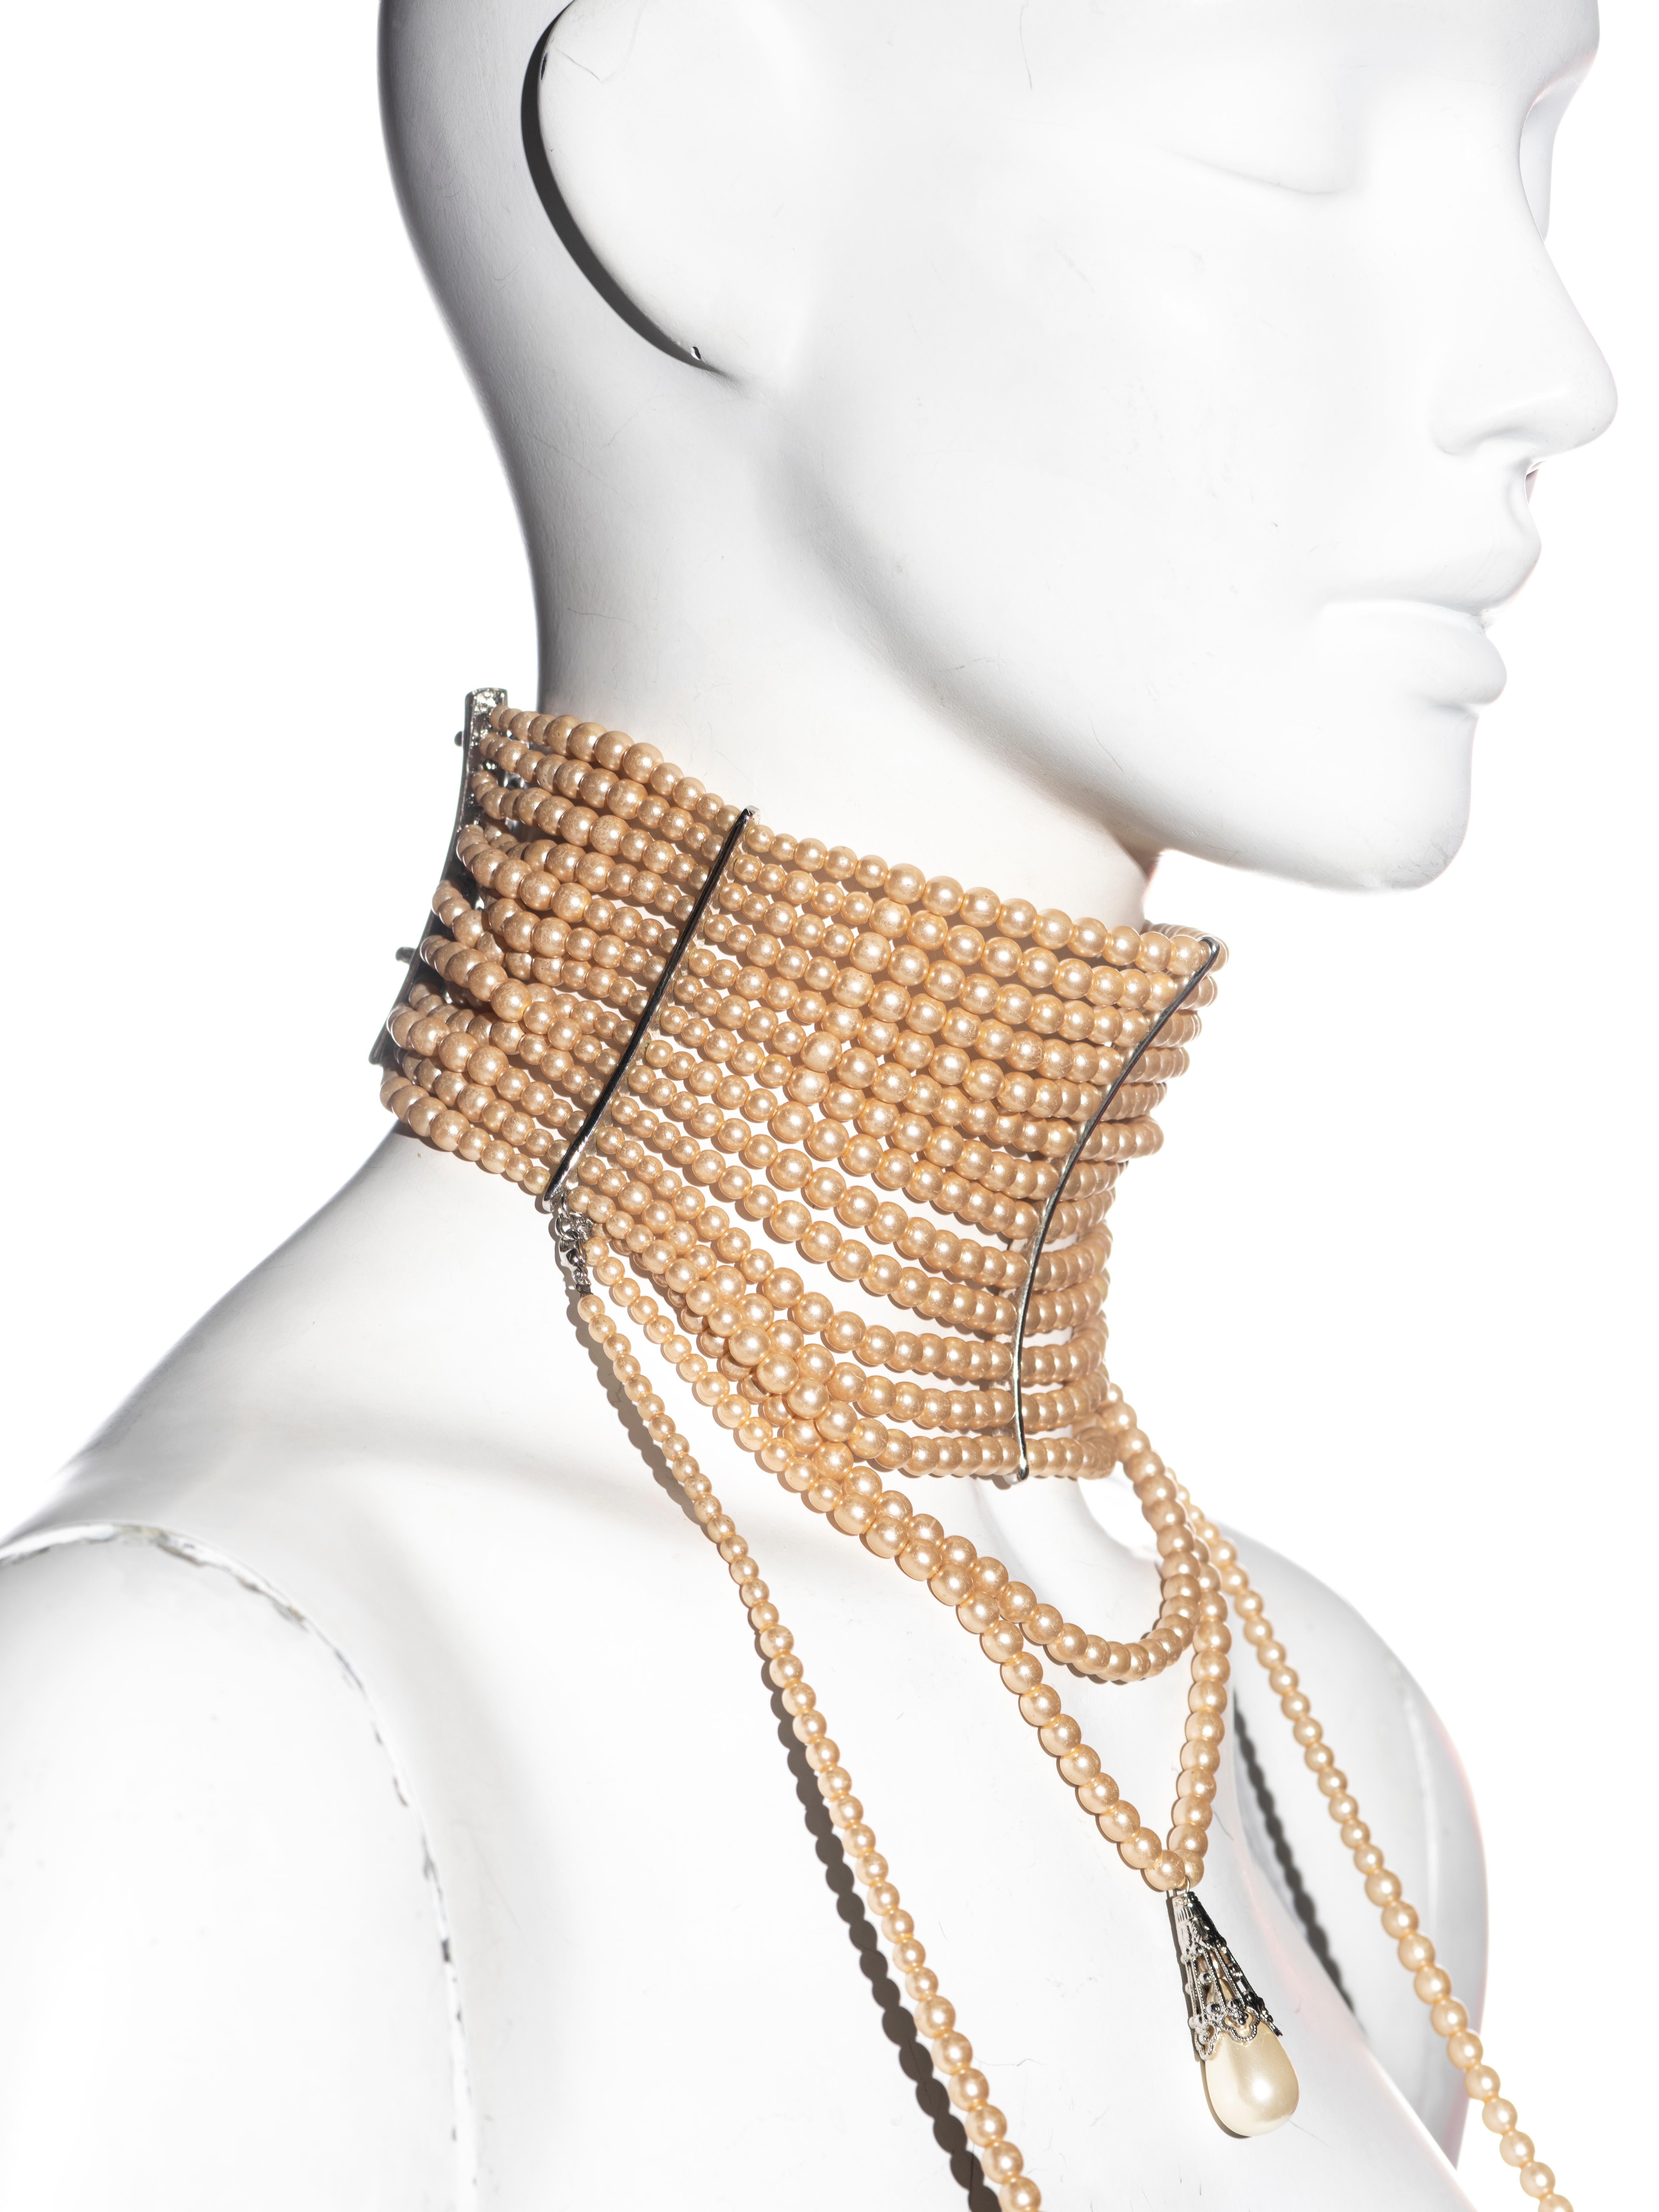 Christian Dior by John Galliano pearl choker necklace, ss 1998 1